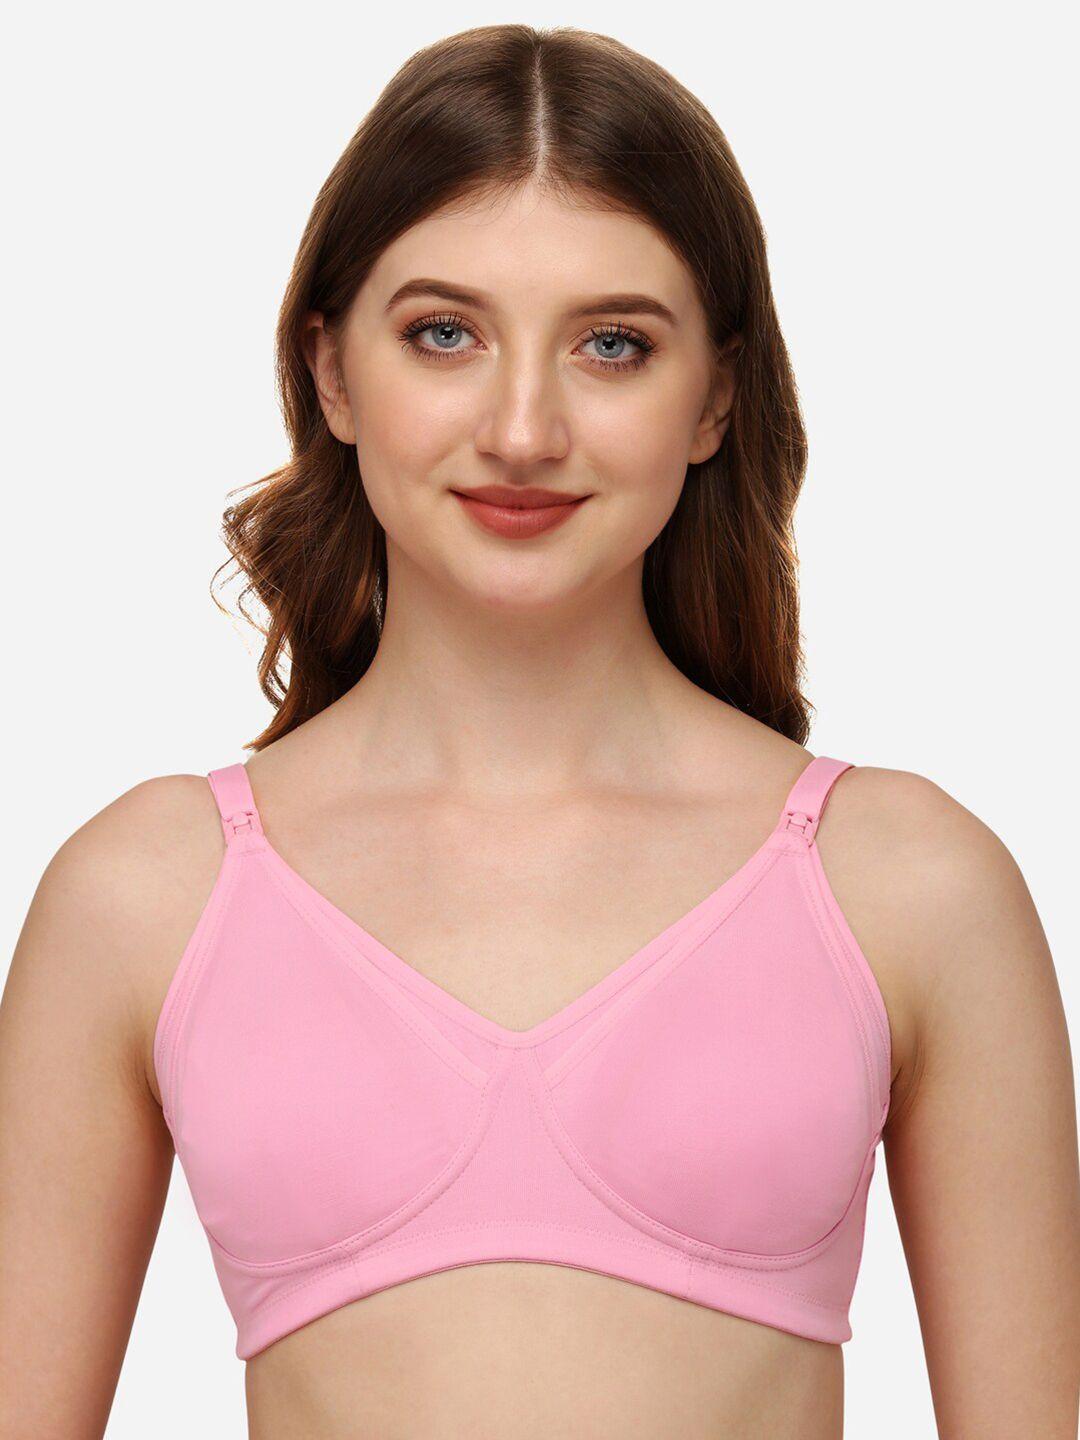 soie pink non-padded non-wired maternity bra